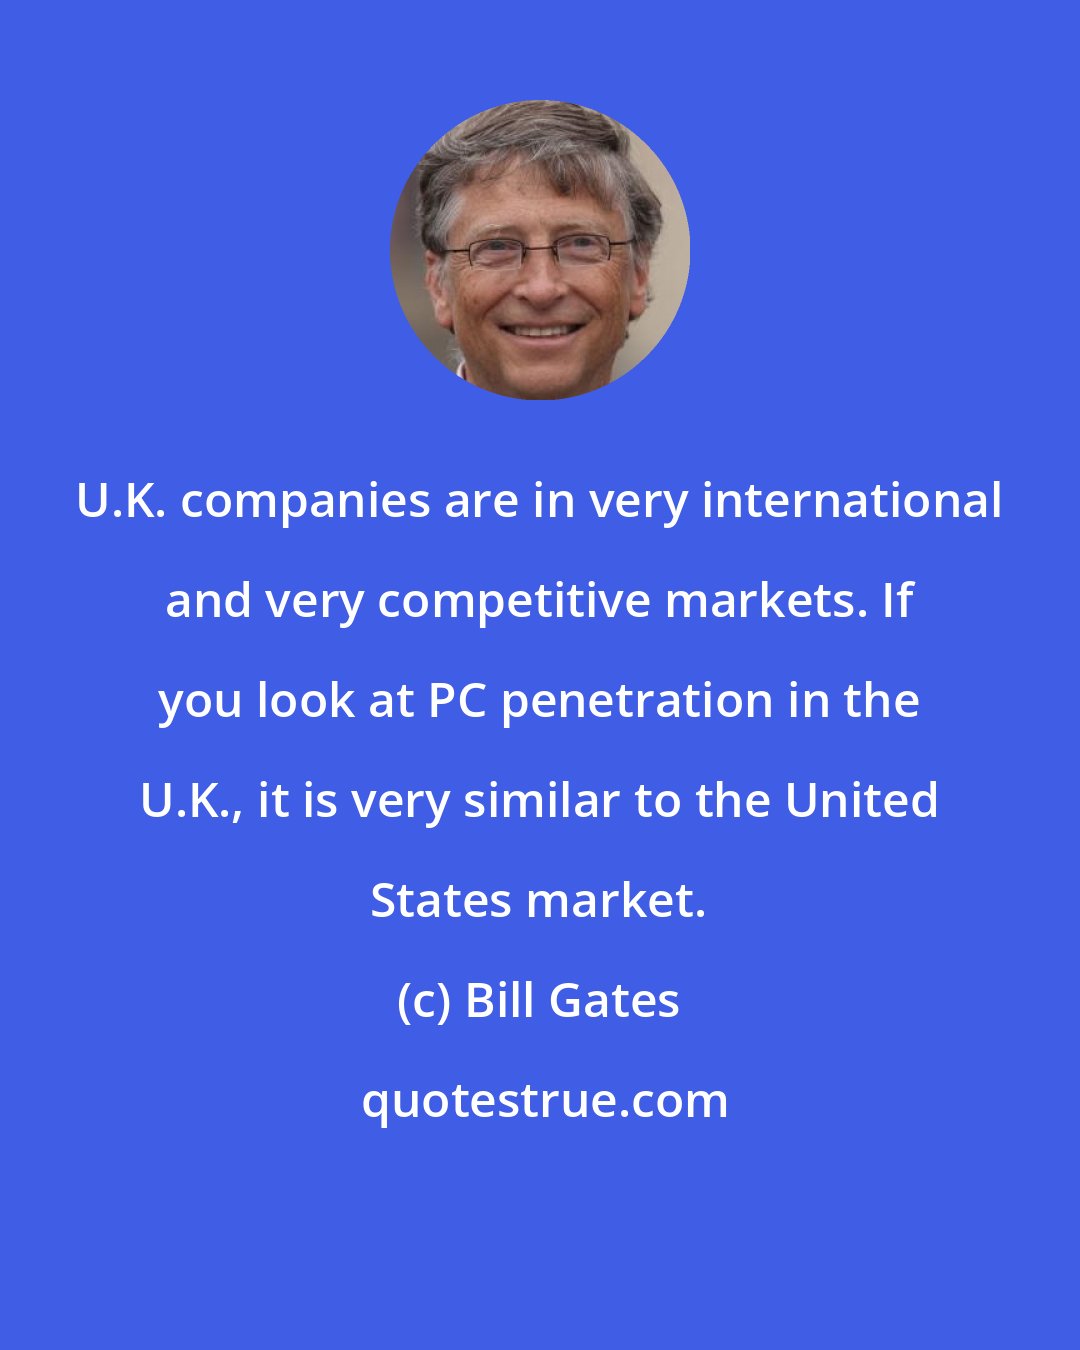 Bill Gates: U.K. companies are in very international and very competitive markets. If you look at PC penetration in the U.K., it is very similar to the United States market.